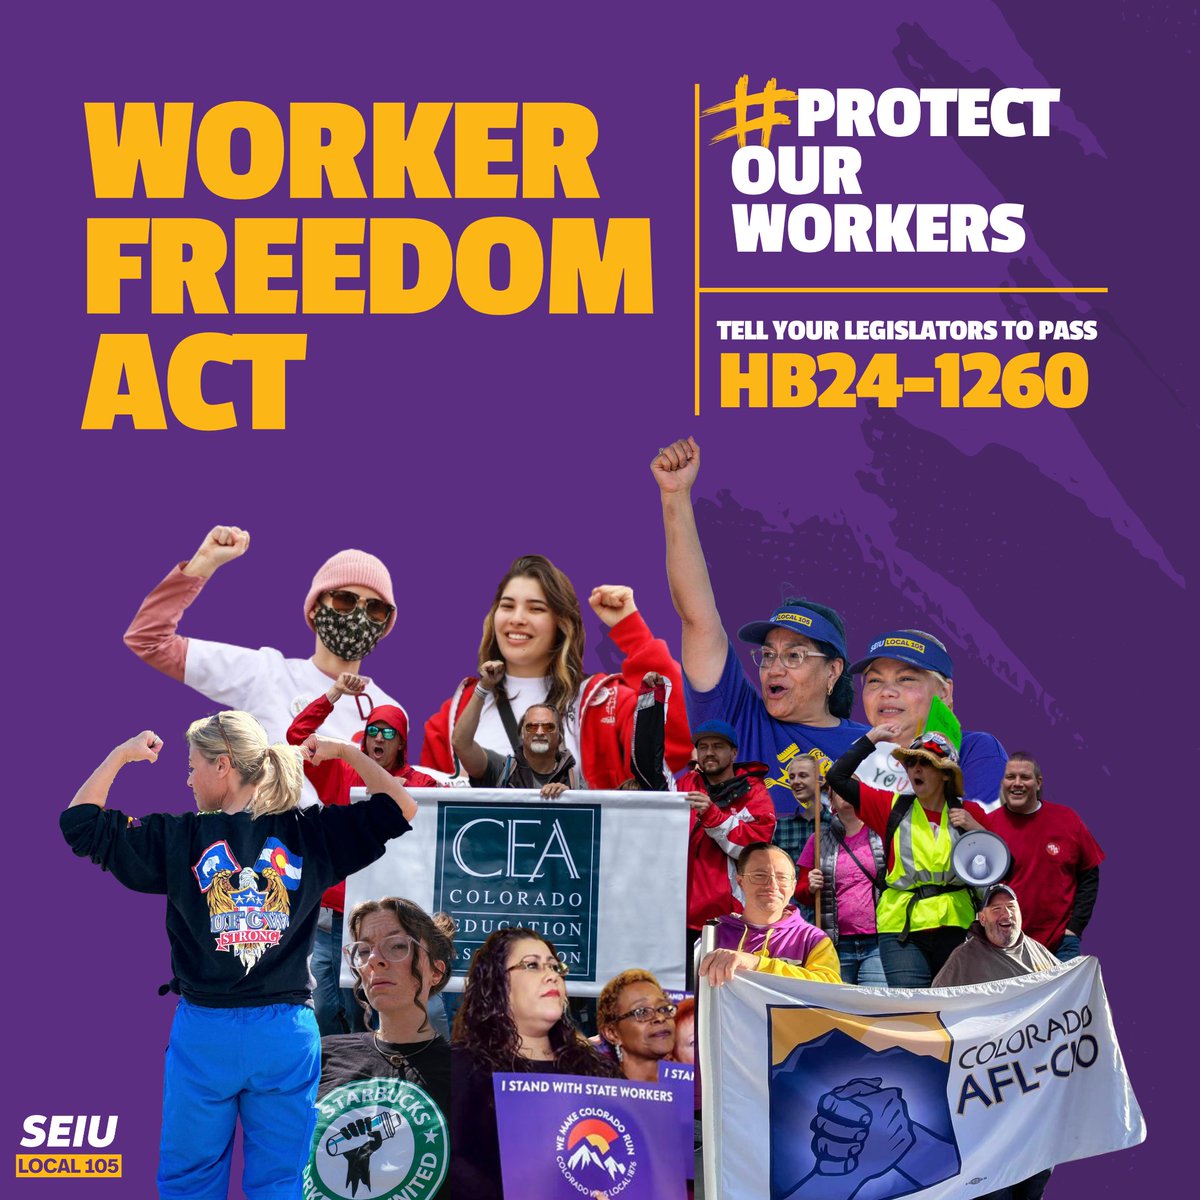 🚨 We're proud to stand with our union family ✊🏿✊🏽✊🏼 across CO in support of the #WorkerFreedomAct (HB24-1260), a new bill in #COLeg that would give workers the right to 🚫 refuse mandatory political and religious meetings at work! Learn more: seiu105.info/wfa24